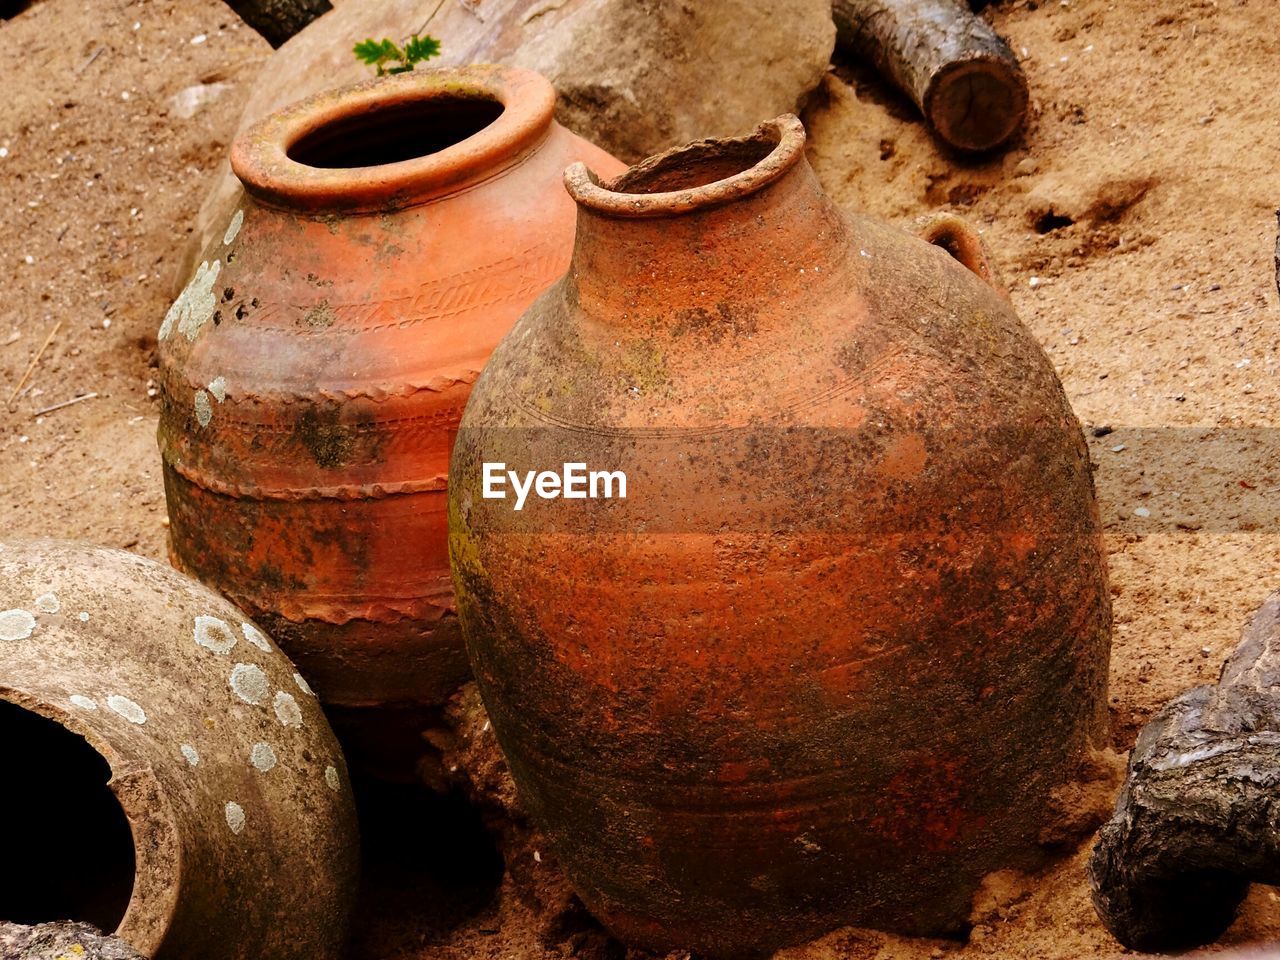 Close-up of abandoned clay pots on field